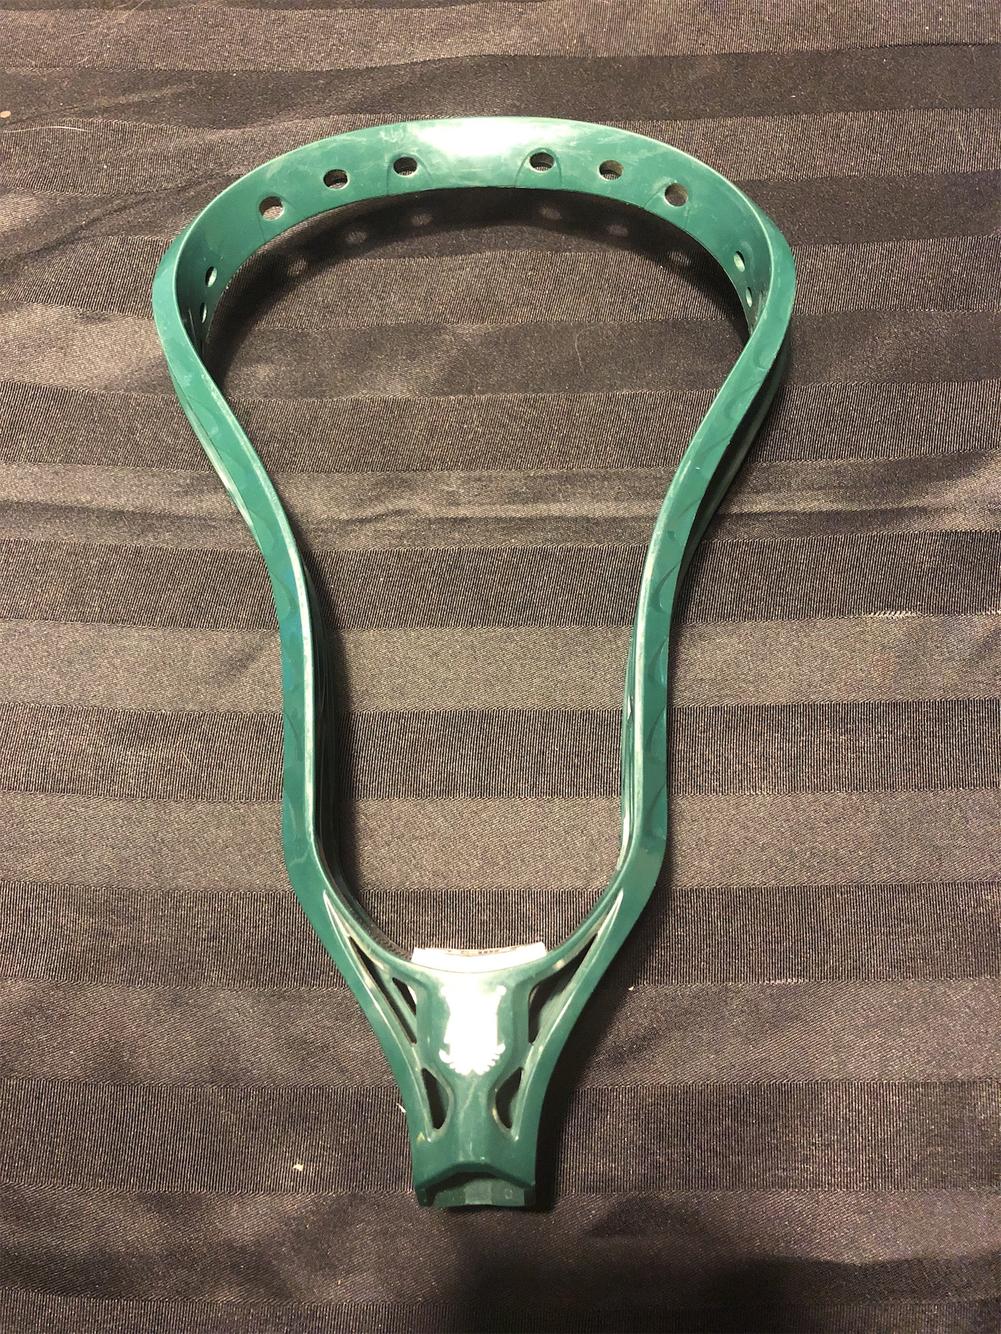 Brine Clutch Elite X Lacrosse LAX Head Unstrung Forest Green List For $99 NEW 